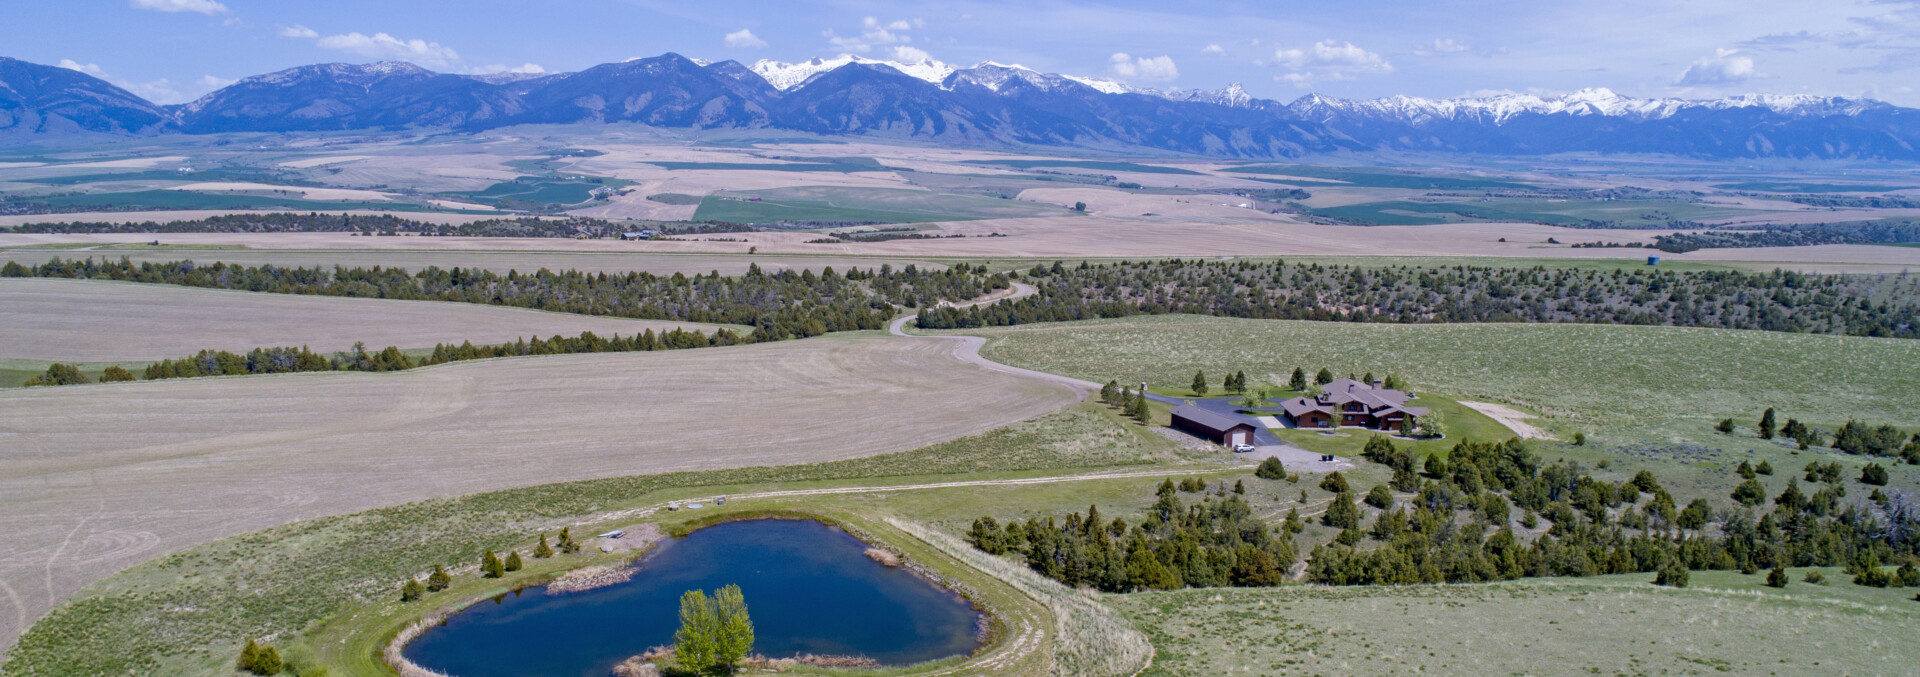 montana ranches for sale gallatin overlook